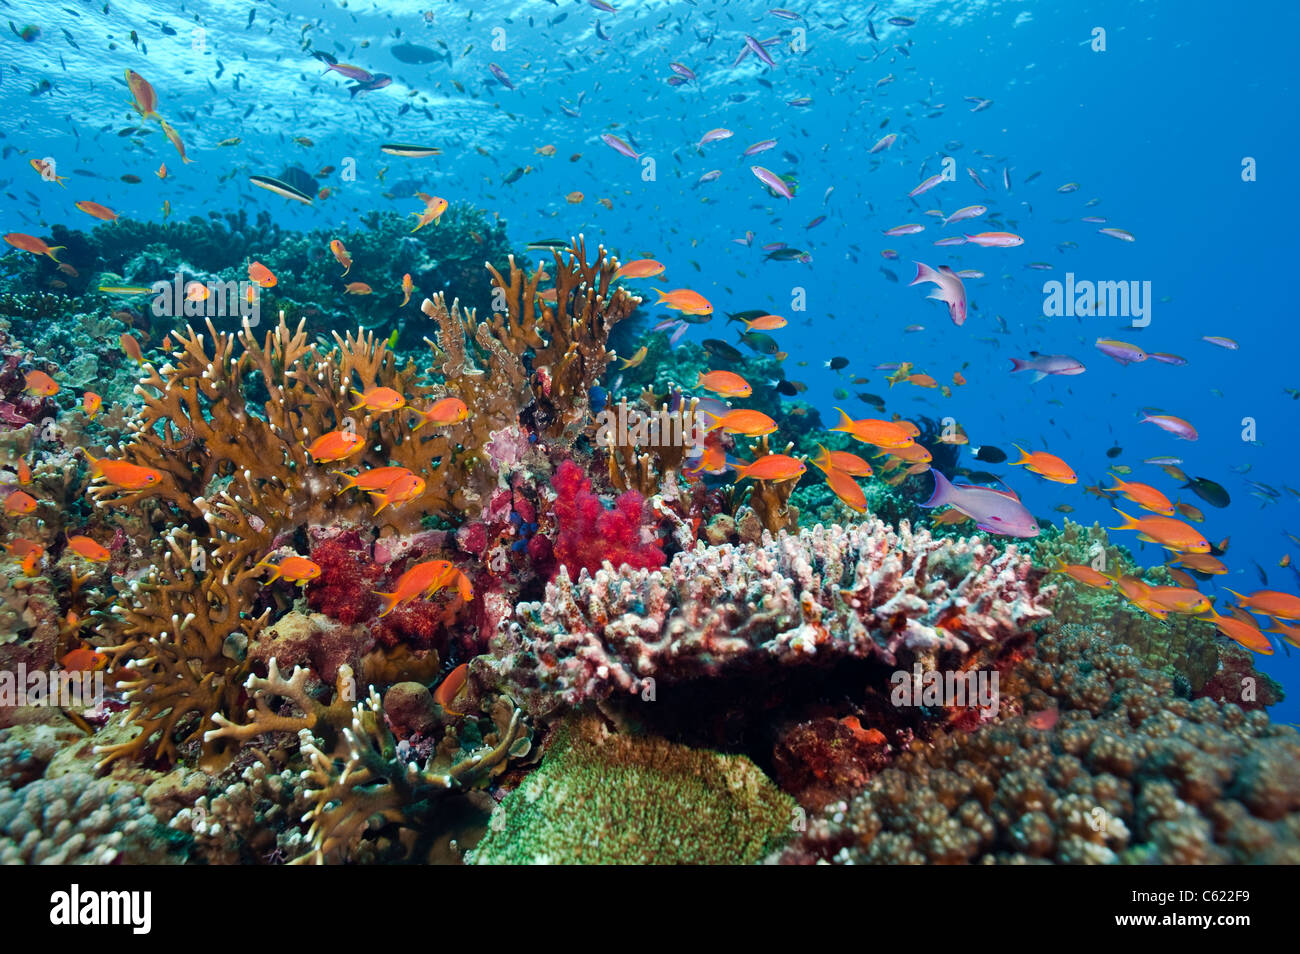 Coral reef in Beqa Lagoon, Pacific Harbor, Viti Levu, Fiji adorned with soft corals from the Dendronephthya family. Stock Photo